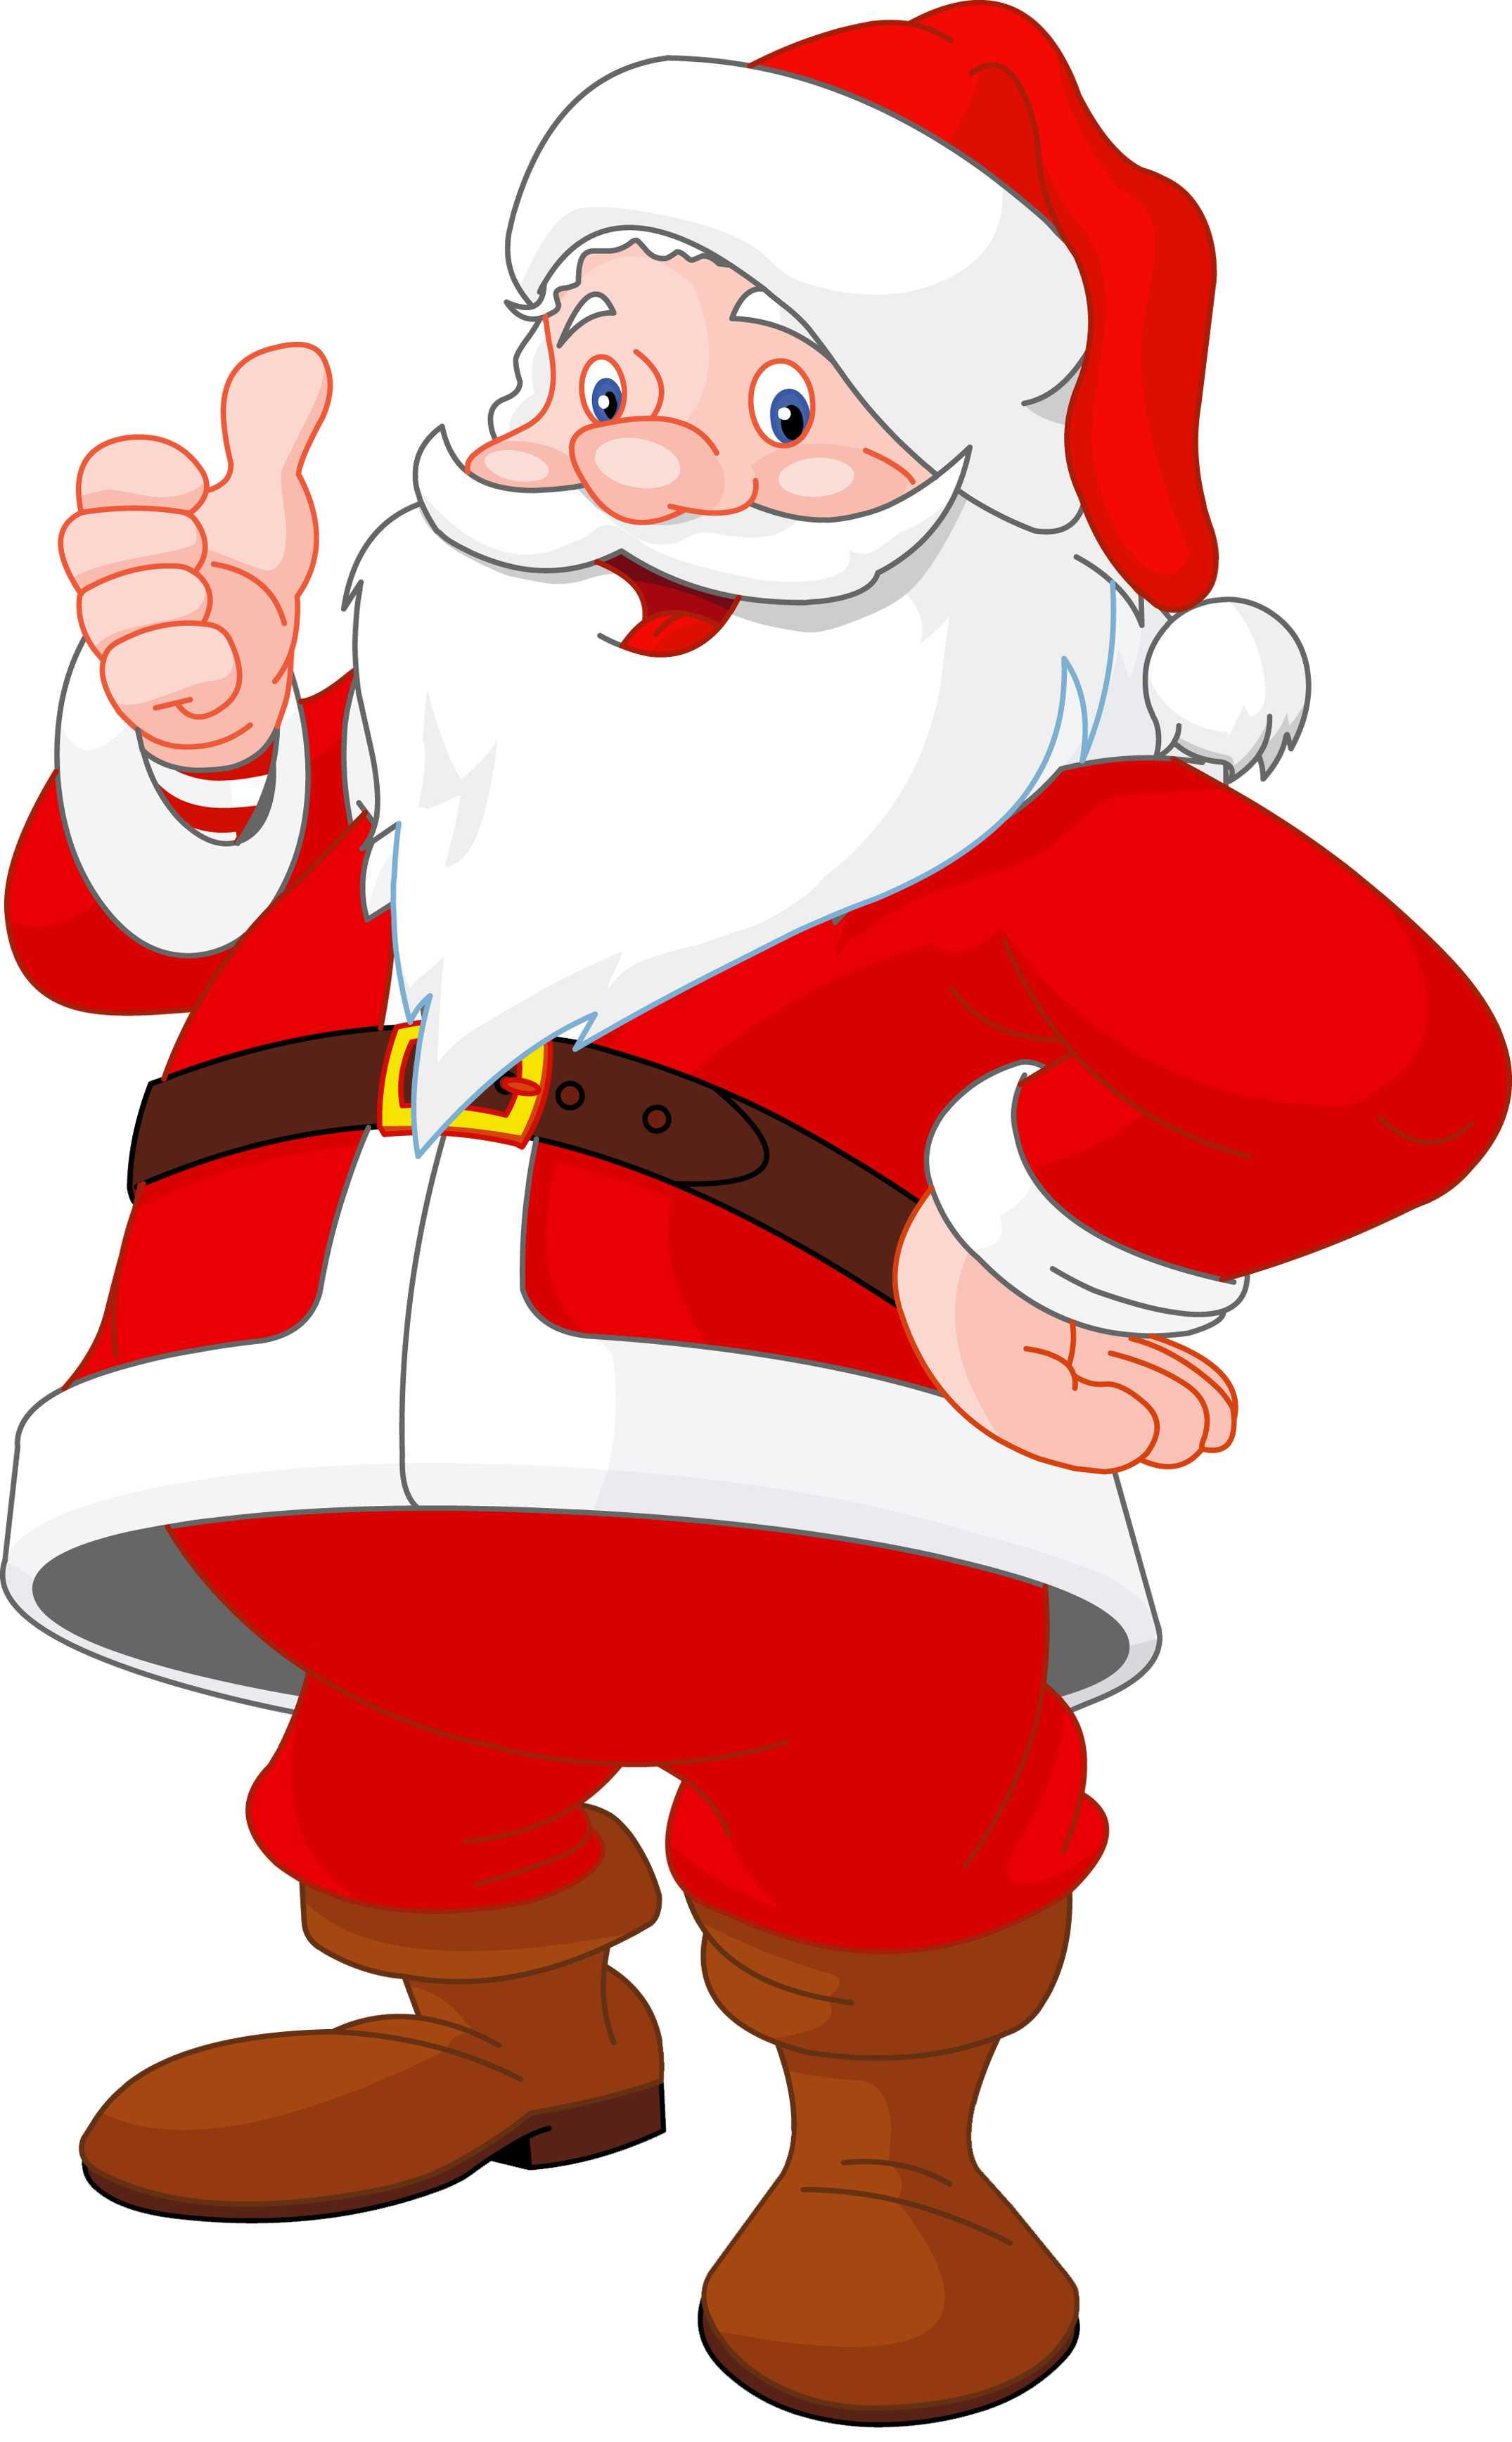 Gloves clipart santa claus. Bagel yeah another blogger